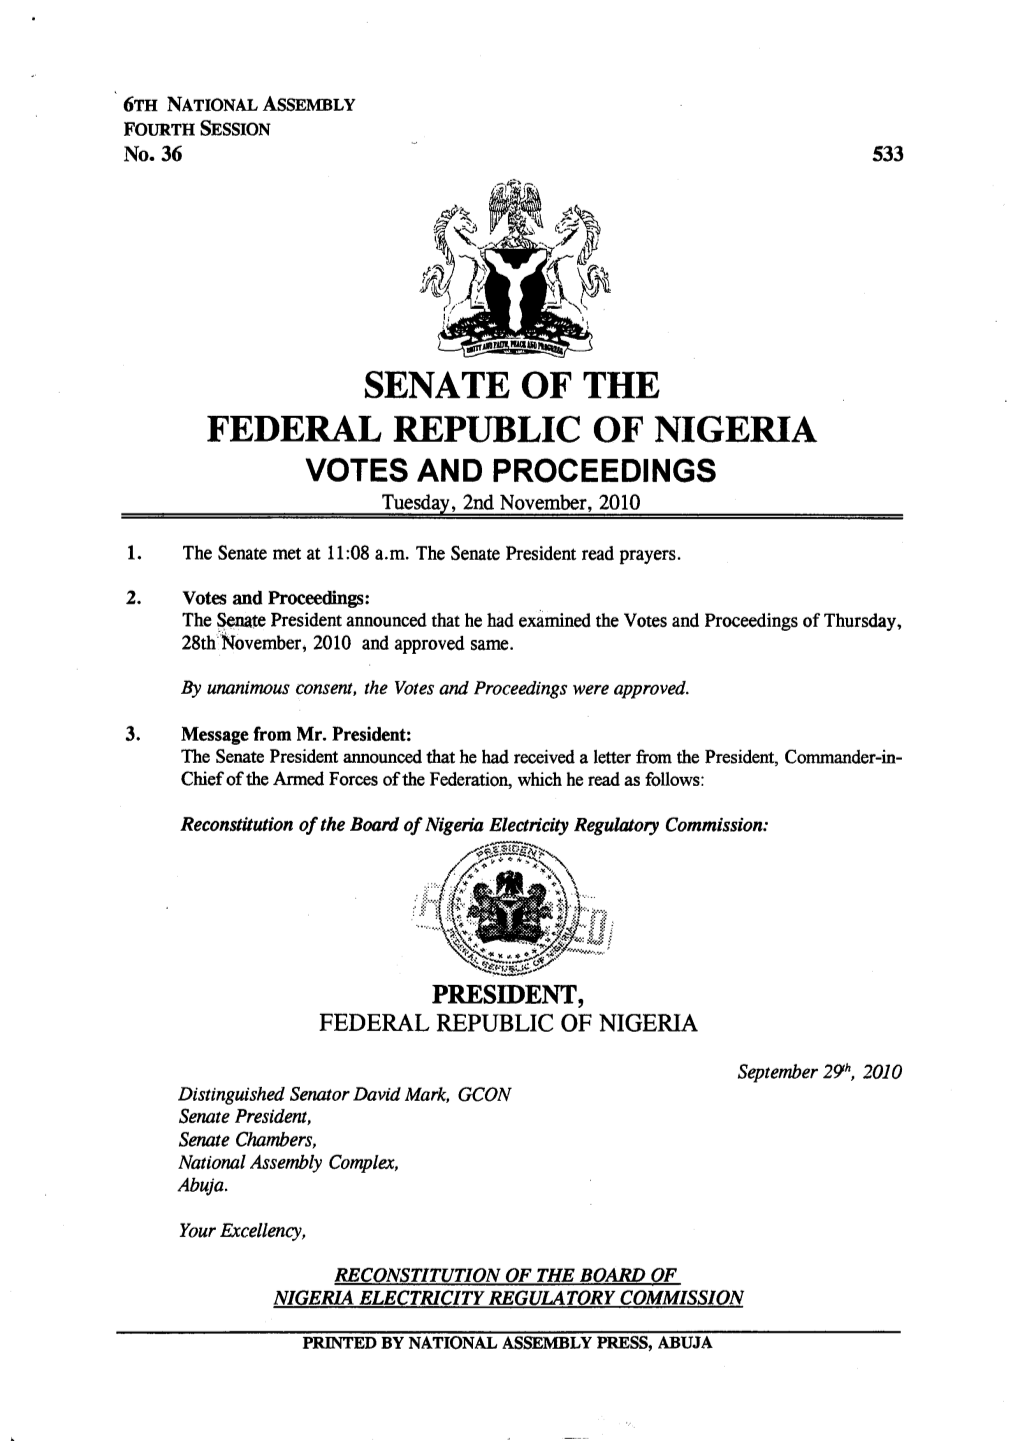 SENATE of the FEDERAL REPUBLIC of NIGERIA VOTES and PROCEEDINGS Tuesday, 2Nd November, 2010